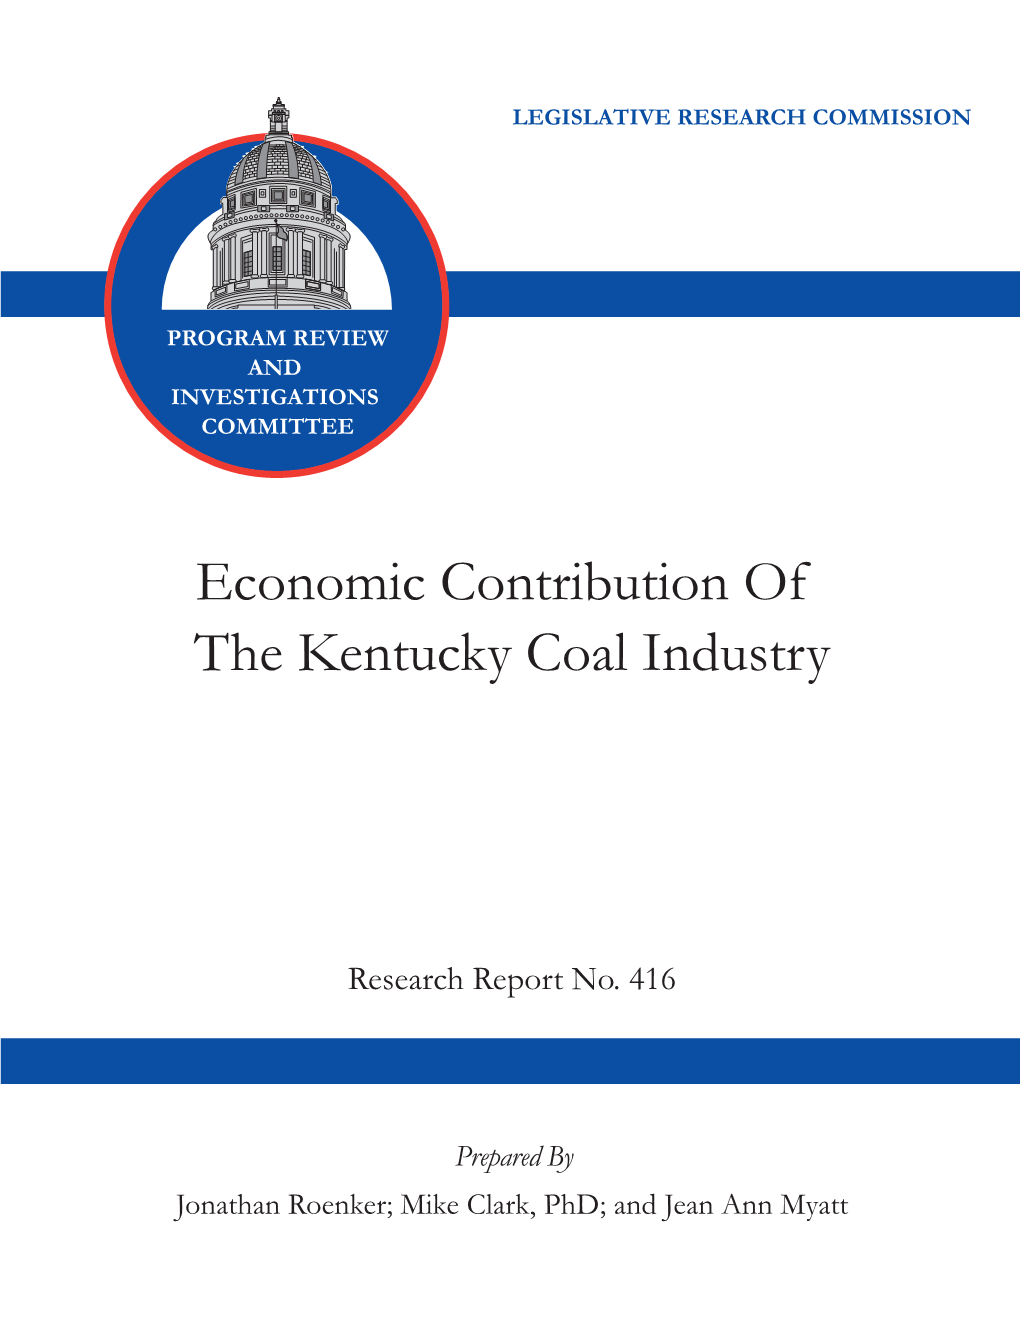 Economic Contribution of the Kentucky Coal Industry